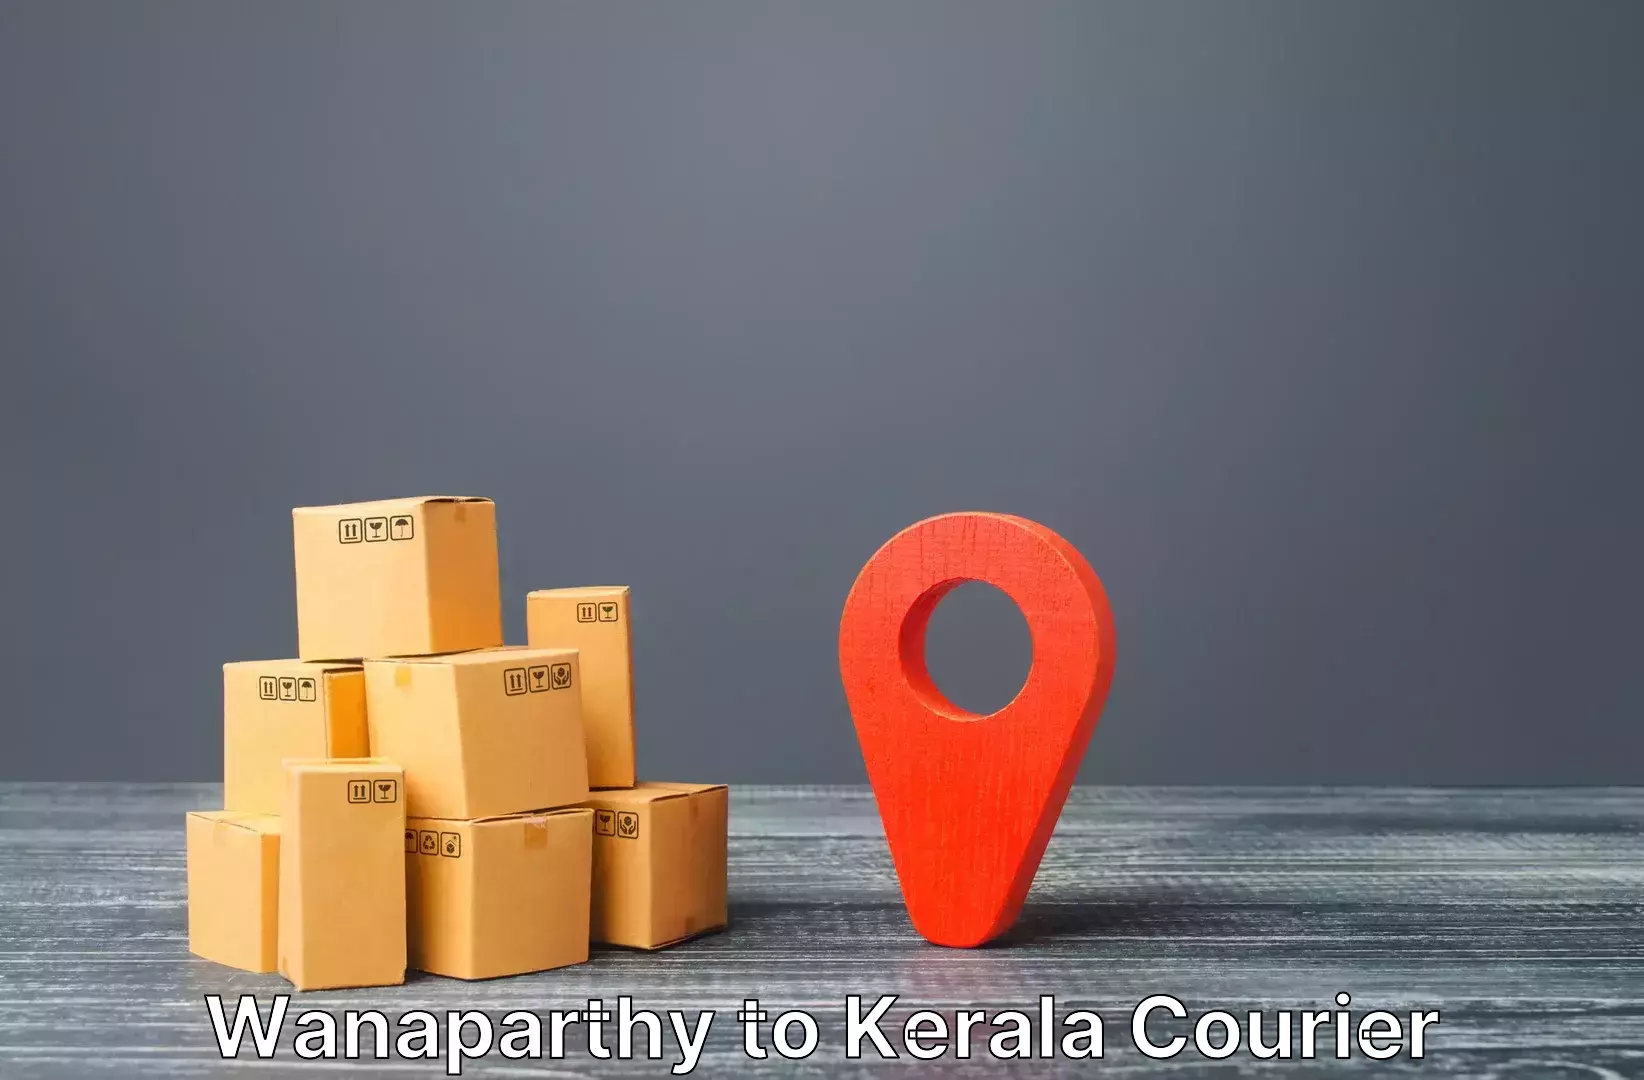 Luggage shipping specialists Wanaparthy to Kerala